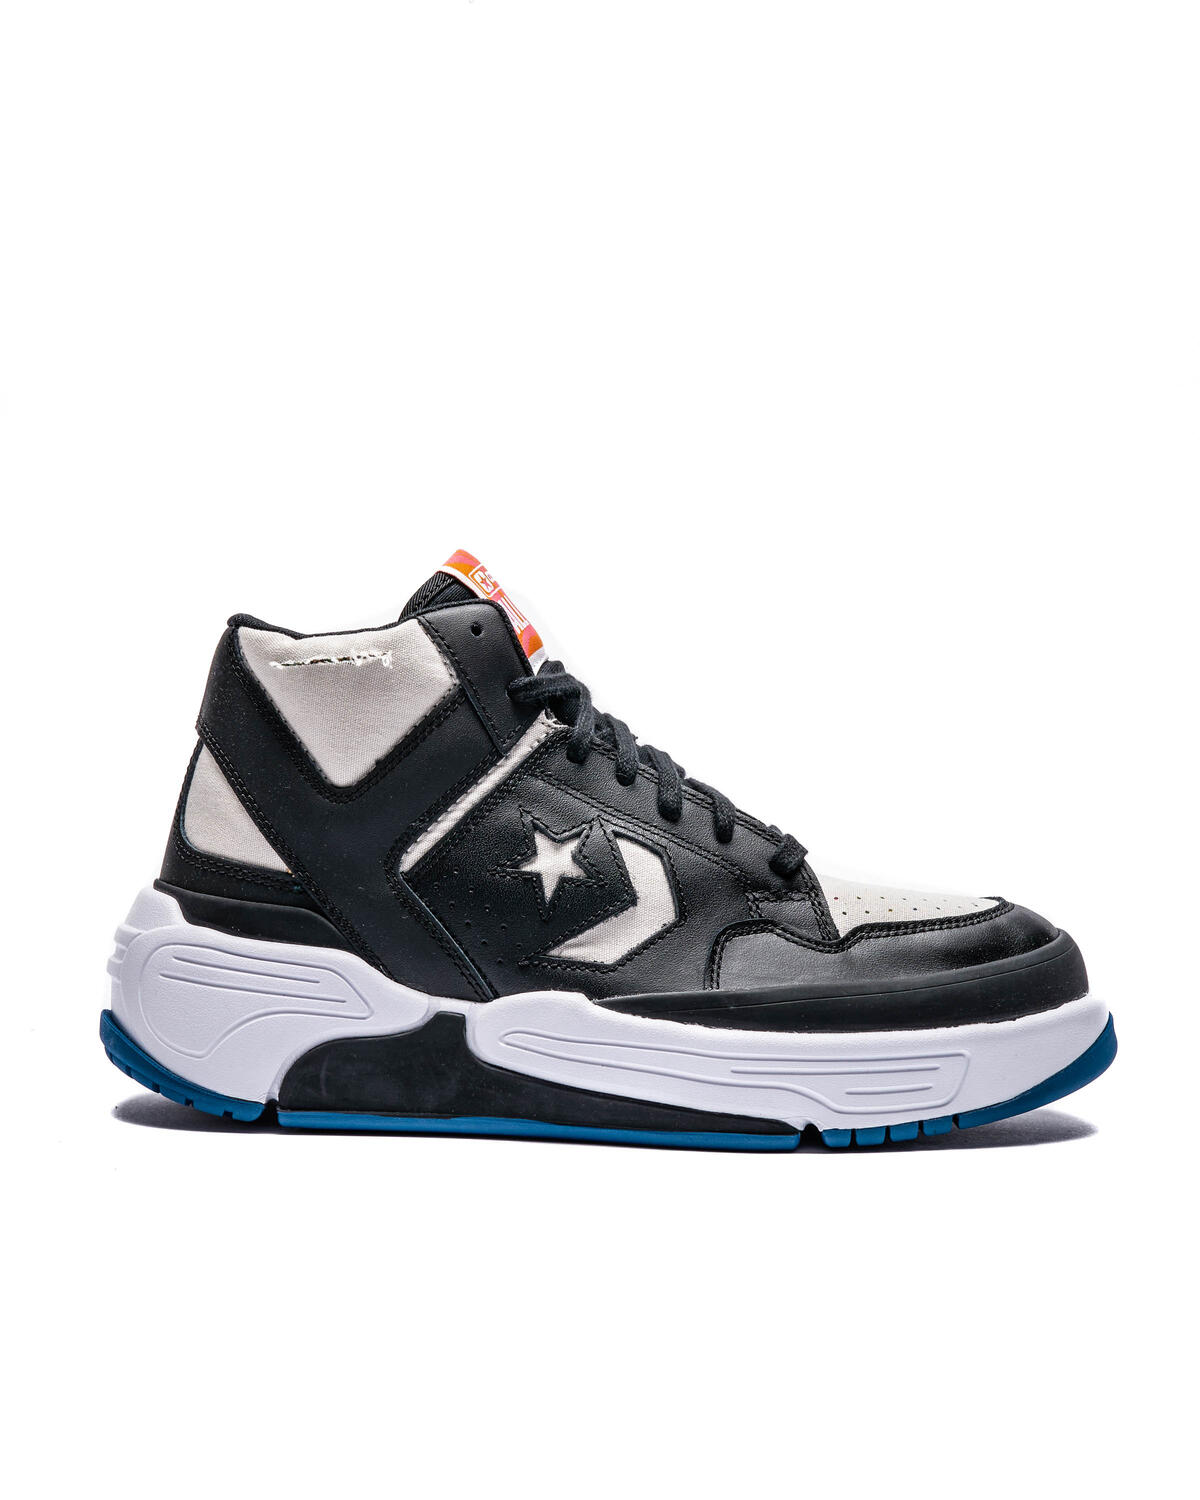 converse weapon cx mid